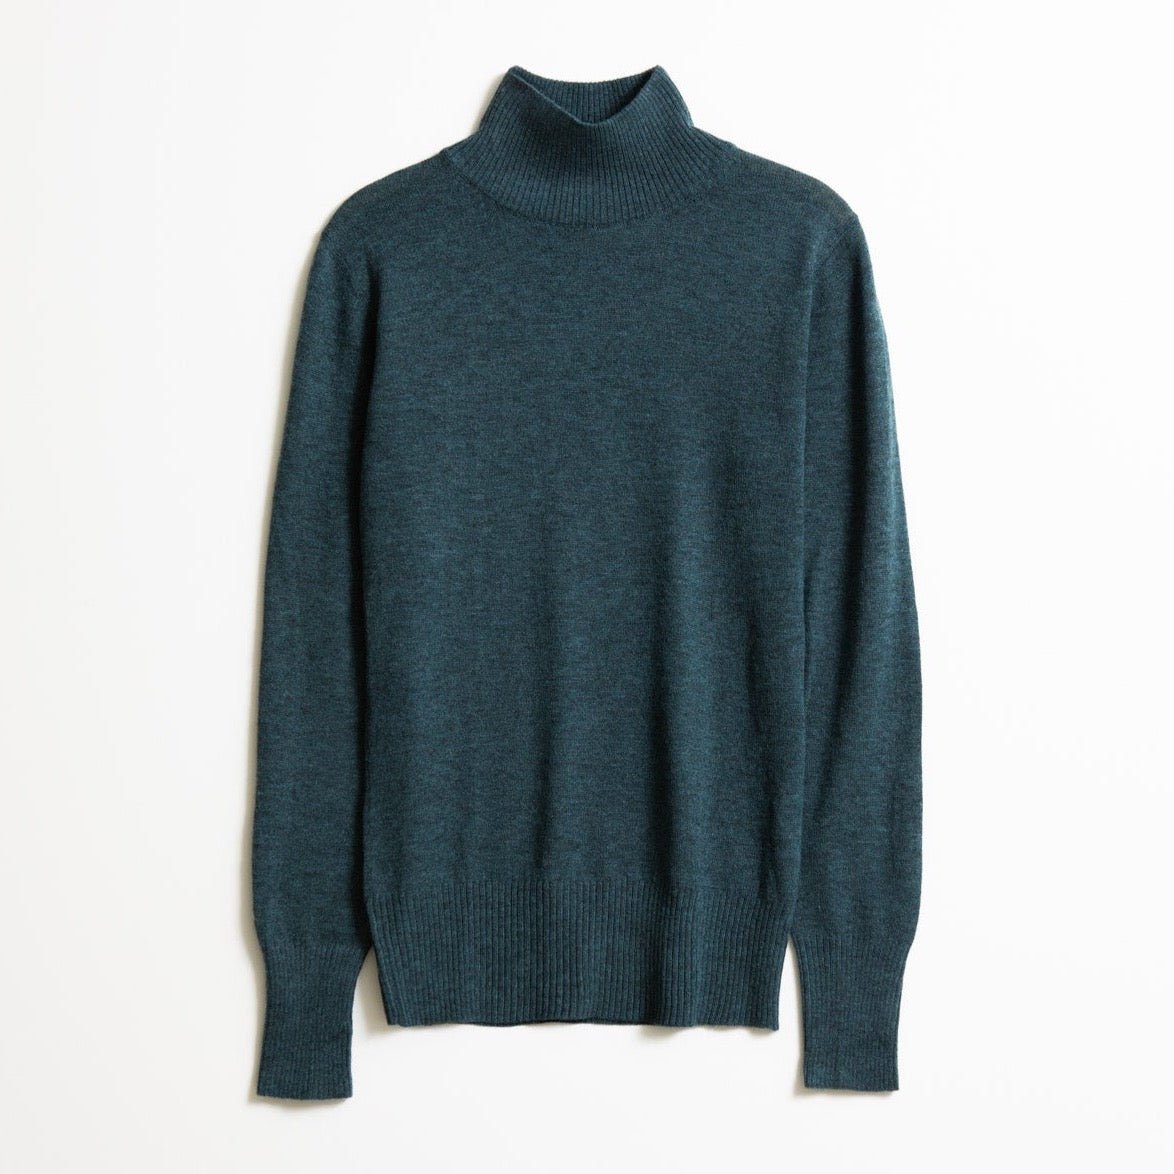 A long sleeve knitted mock neck turtleneck in a dark teal. The Merino Turtleneck in Dragonfly Green is designed by Dinadi and hand knitted in Kathmandu, Nepal.